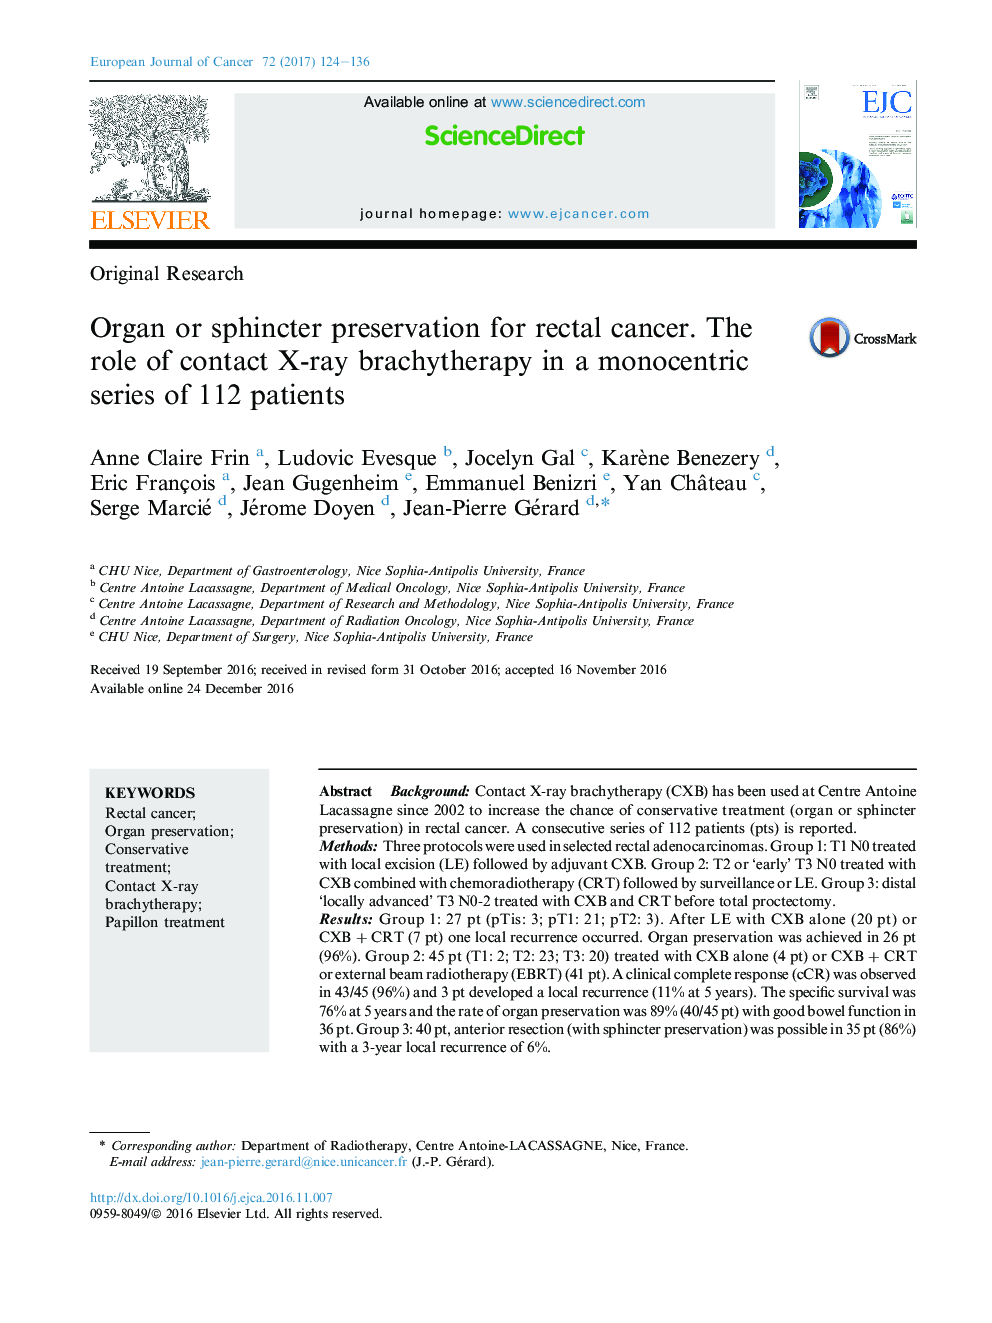 Original ResearchOrgan or sphincter preservation for rectal cancer. The role of contact X-ray brachytherapy in a monocentric series of 112 patients